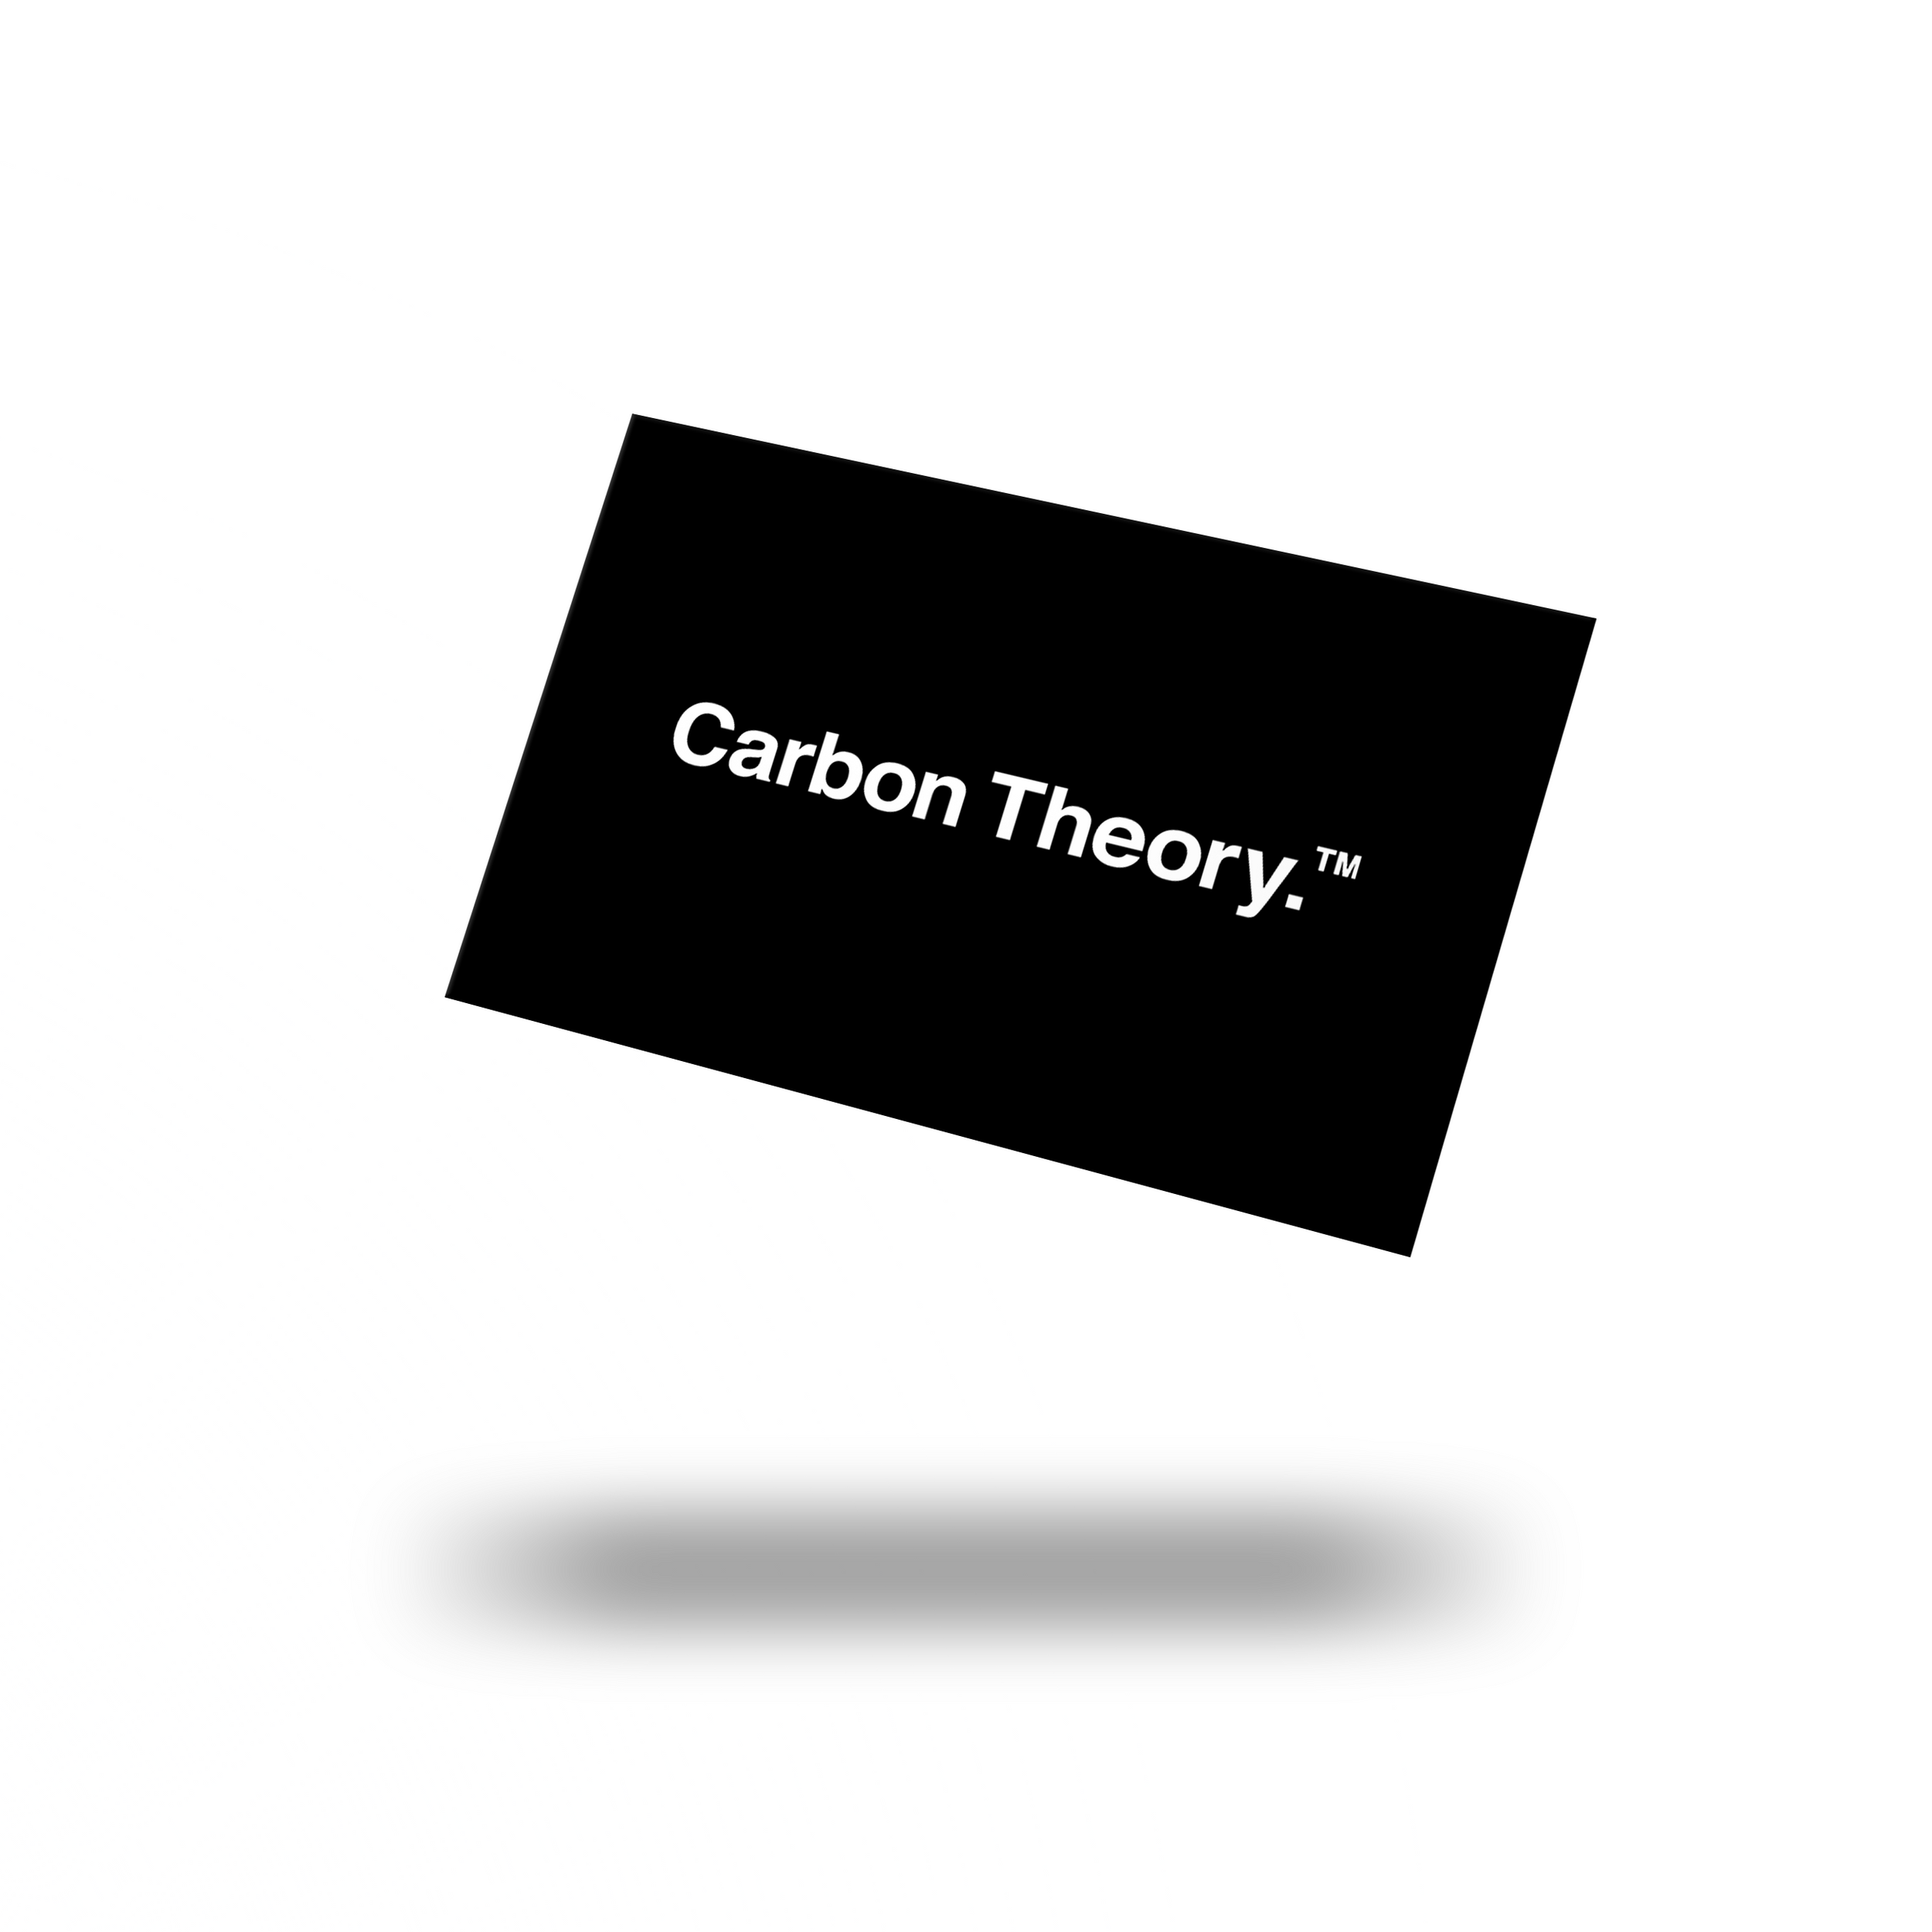 Carbon Theory